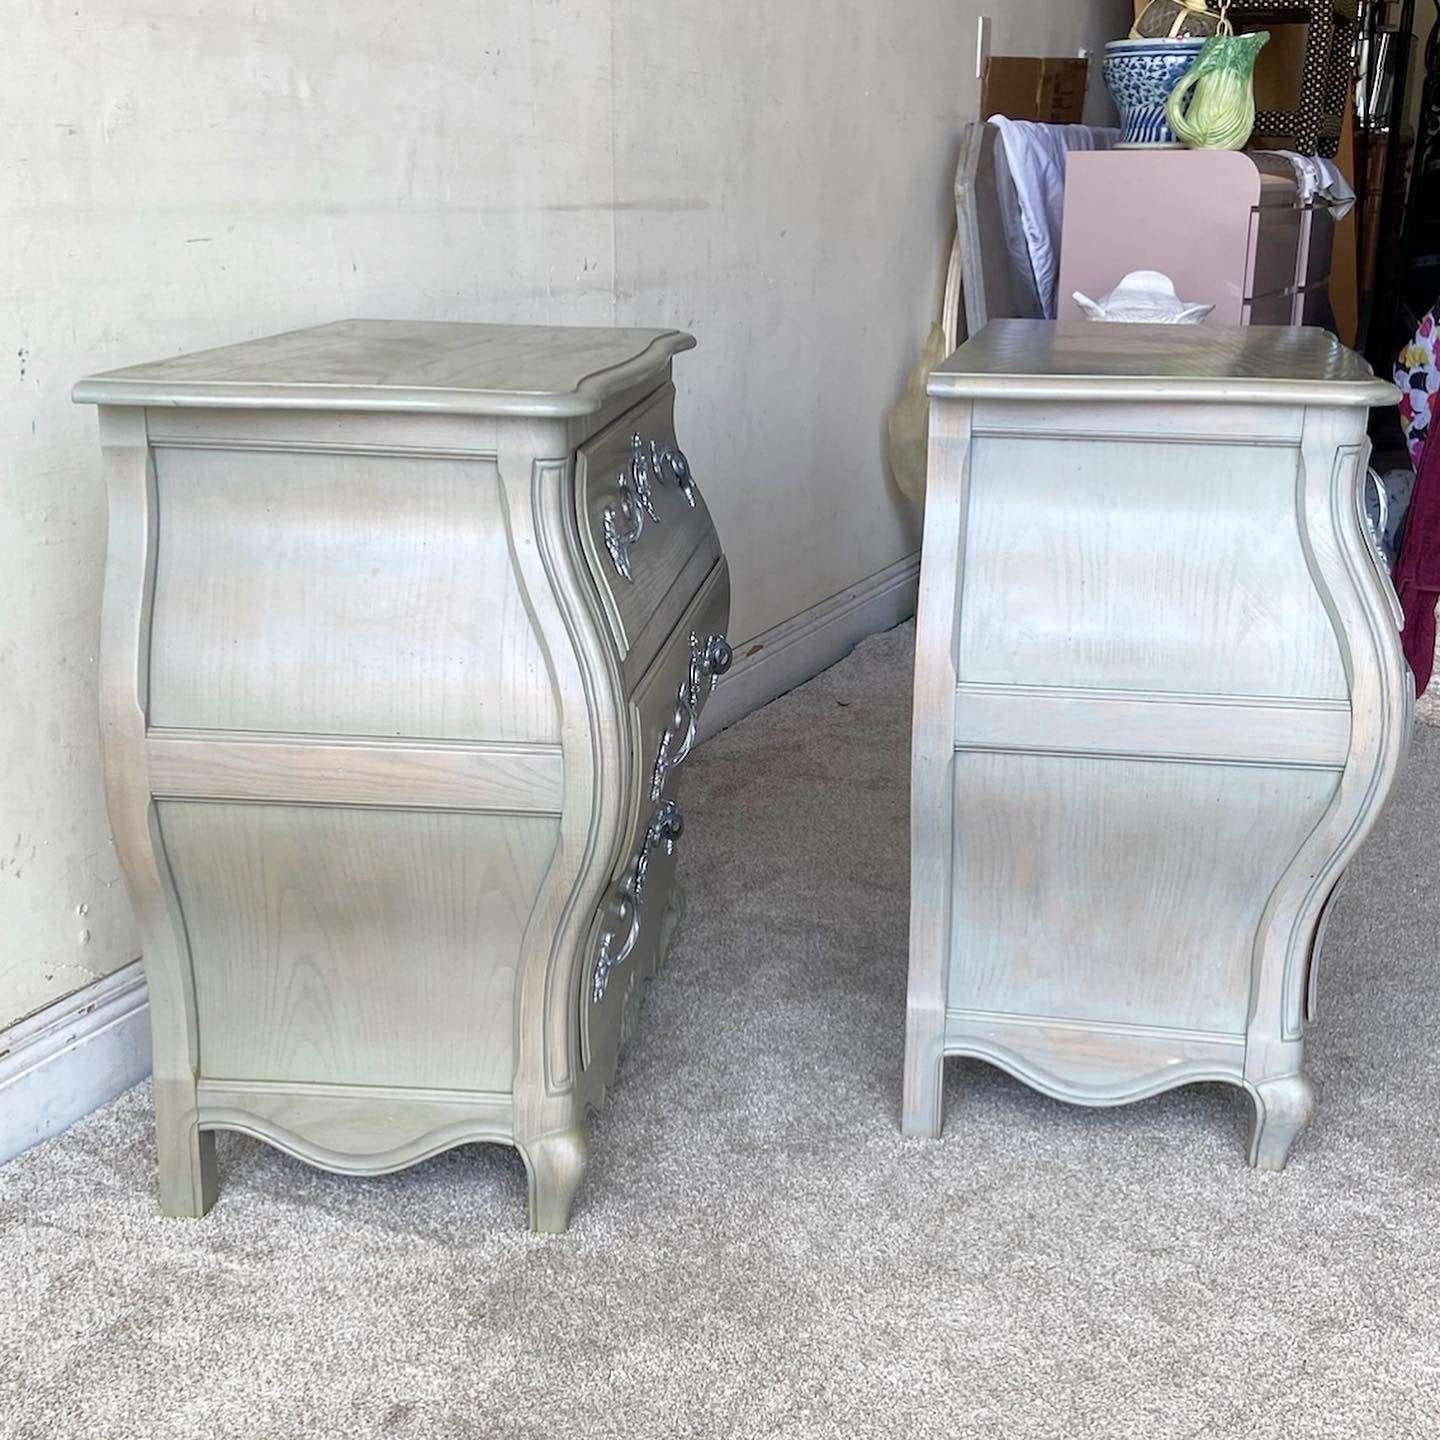 American Vintage French Provincial Louis Xv Style Bombé Commodes by Baker - a Pair For Sale